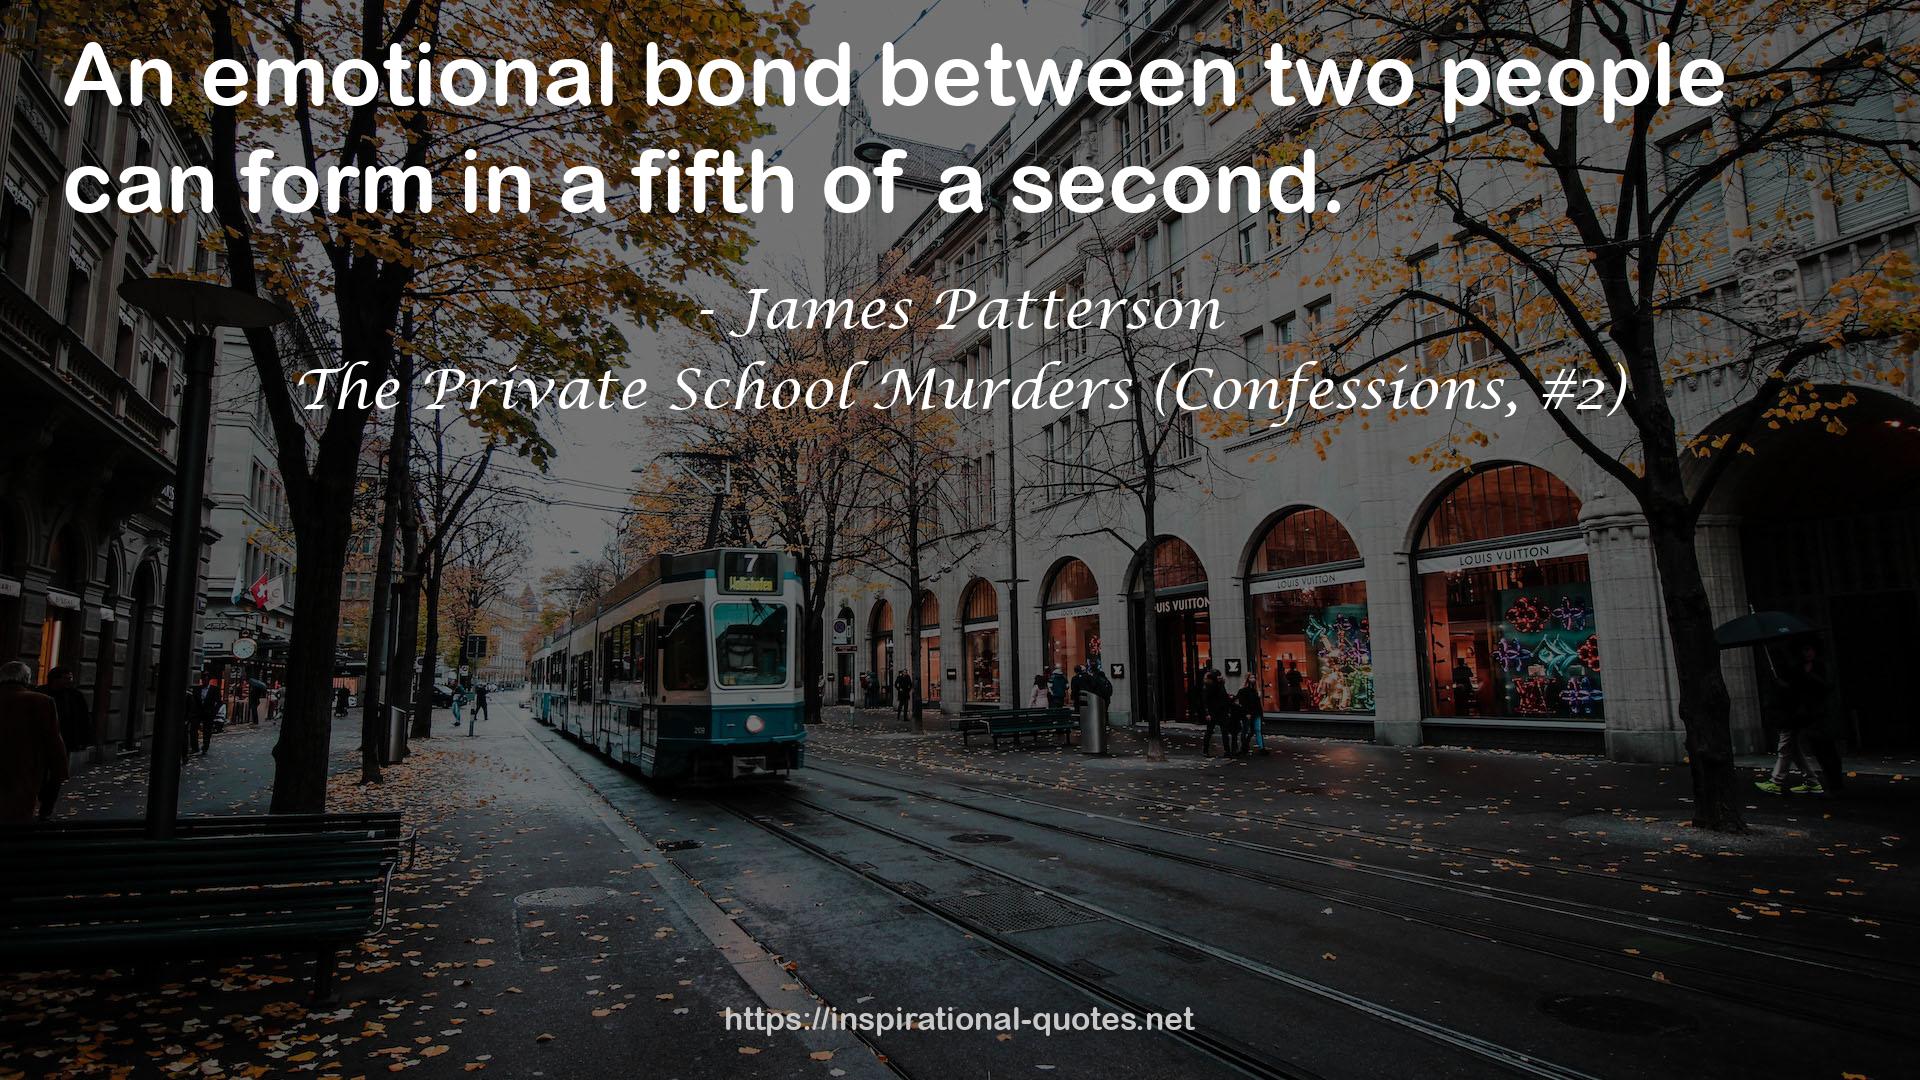 The Private School Murders (Confessions, #2) QUOTES